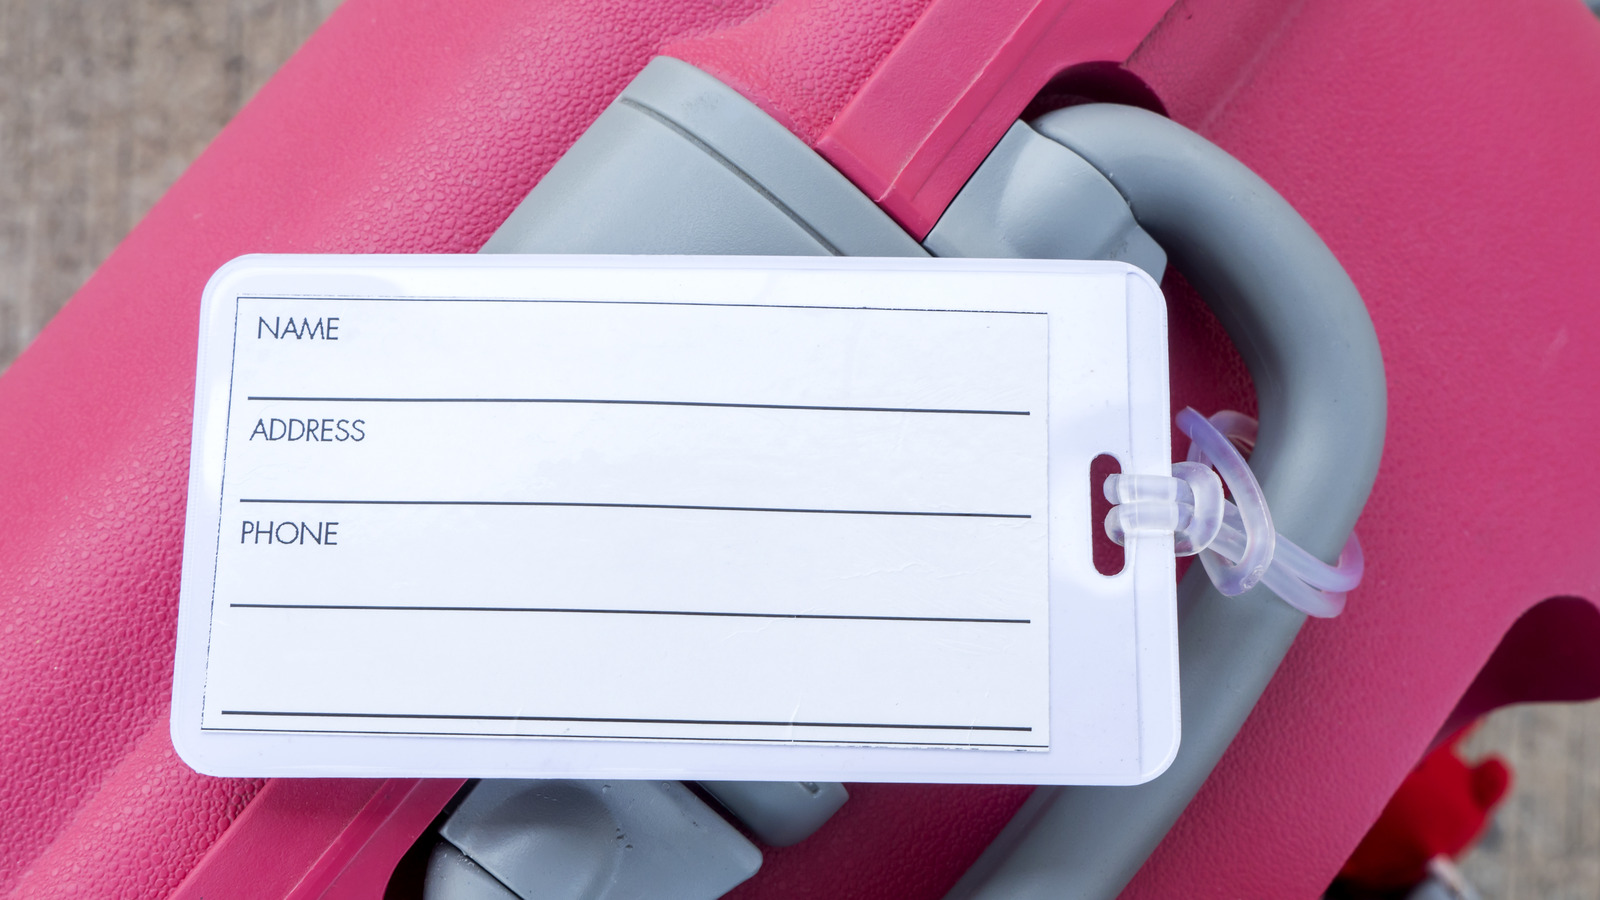 What is a Luggage Tag & Why Do We Need One?